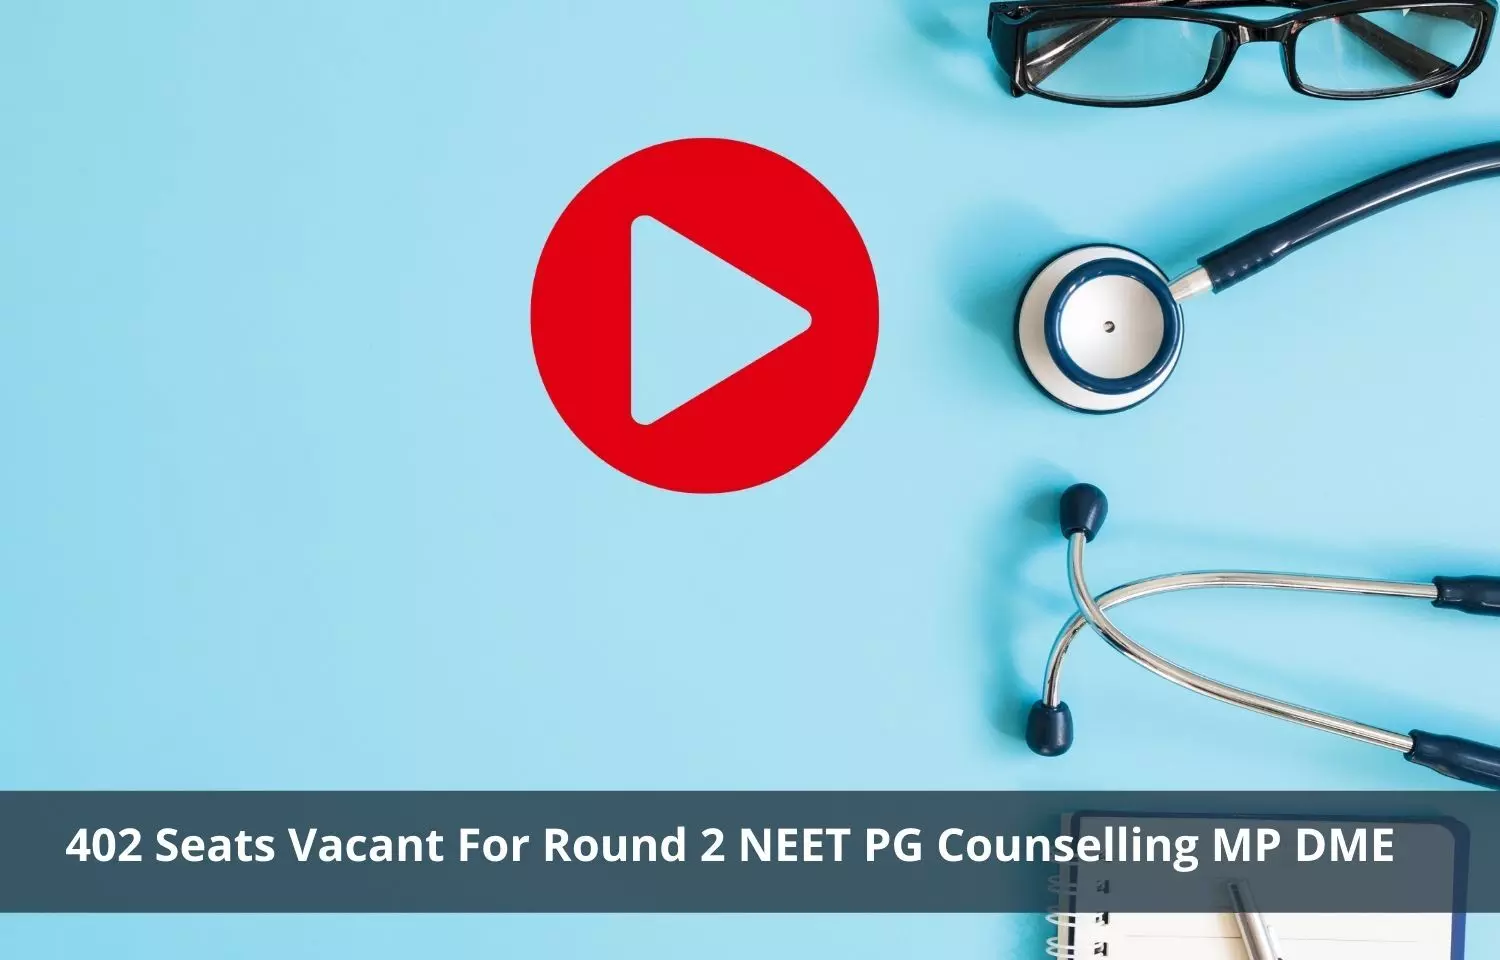 402 seats vacant for Round 2 NEET PG counselling, says MP DME